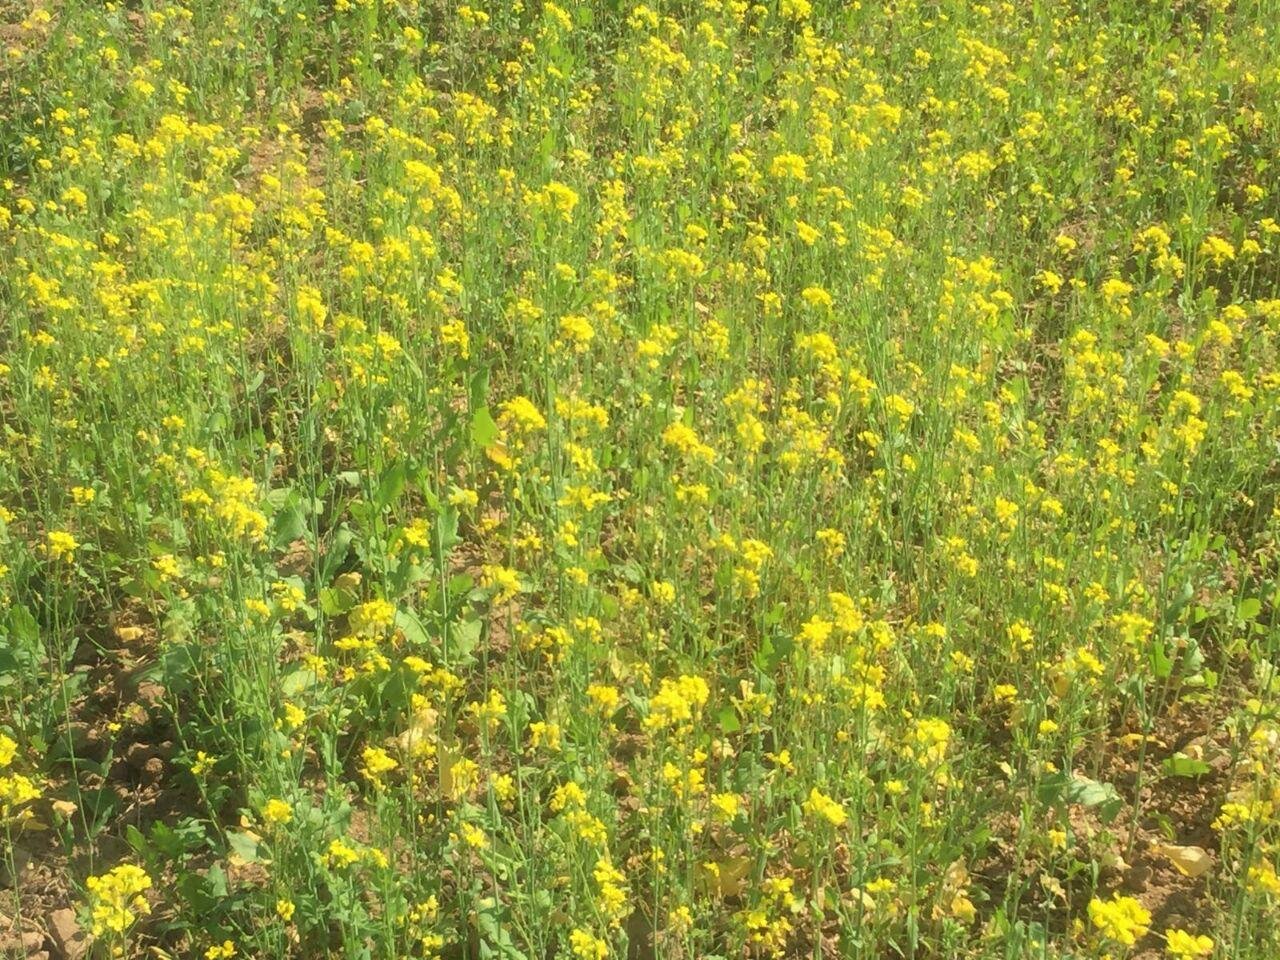 That’s how beautiful a mustard crop is. Very beautifully fragrant